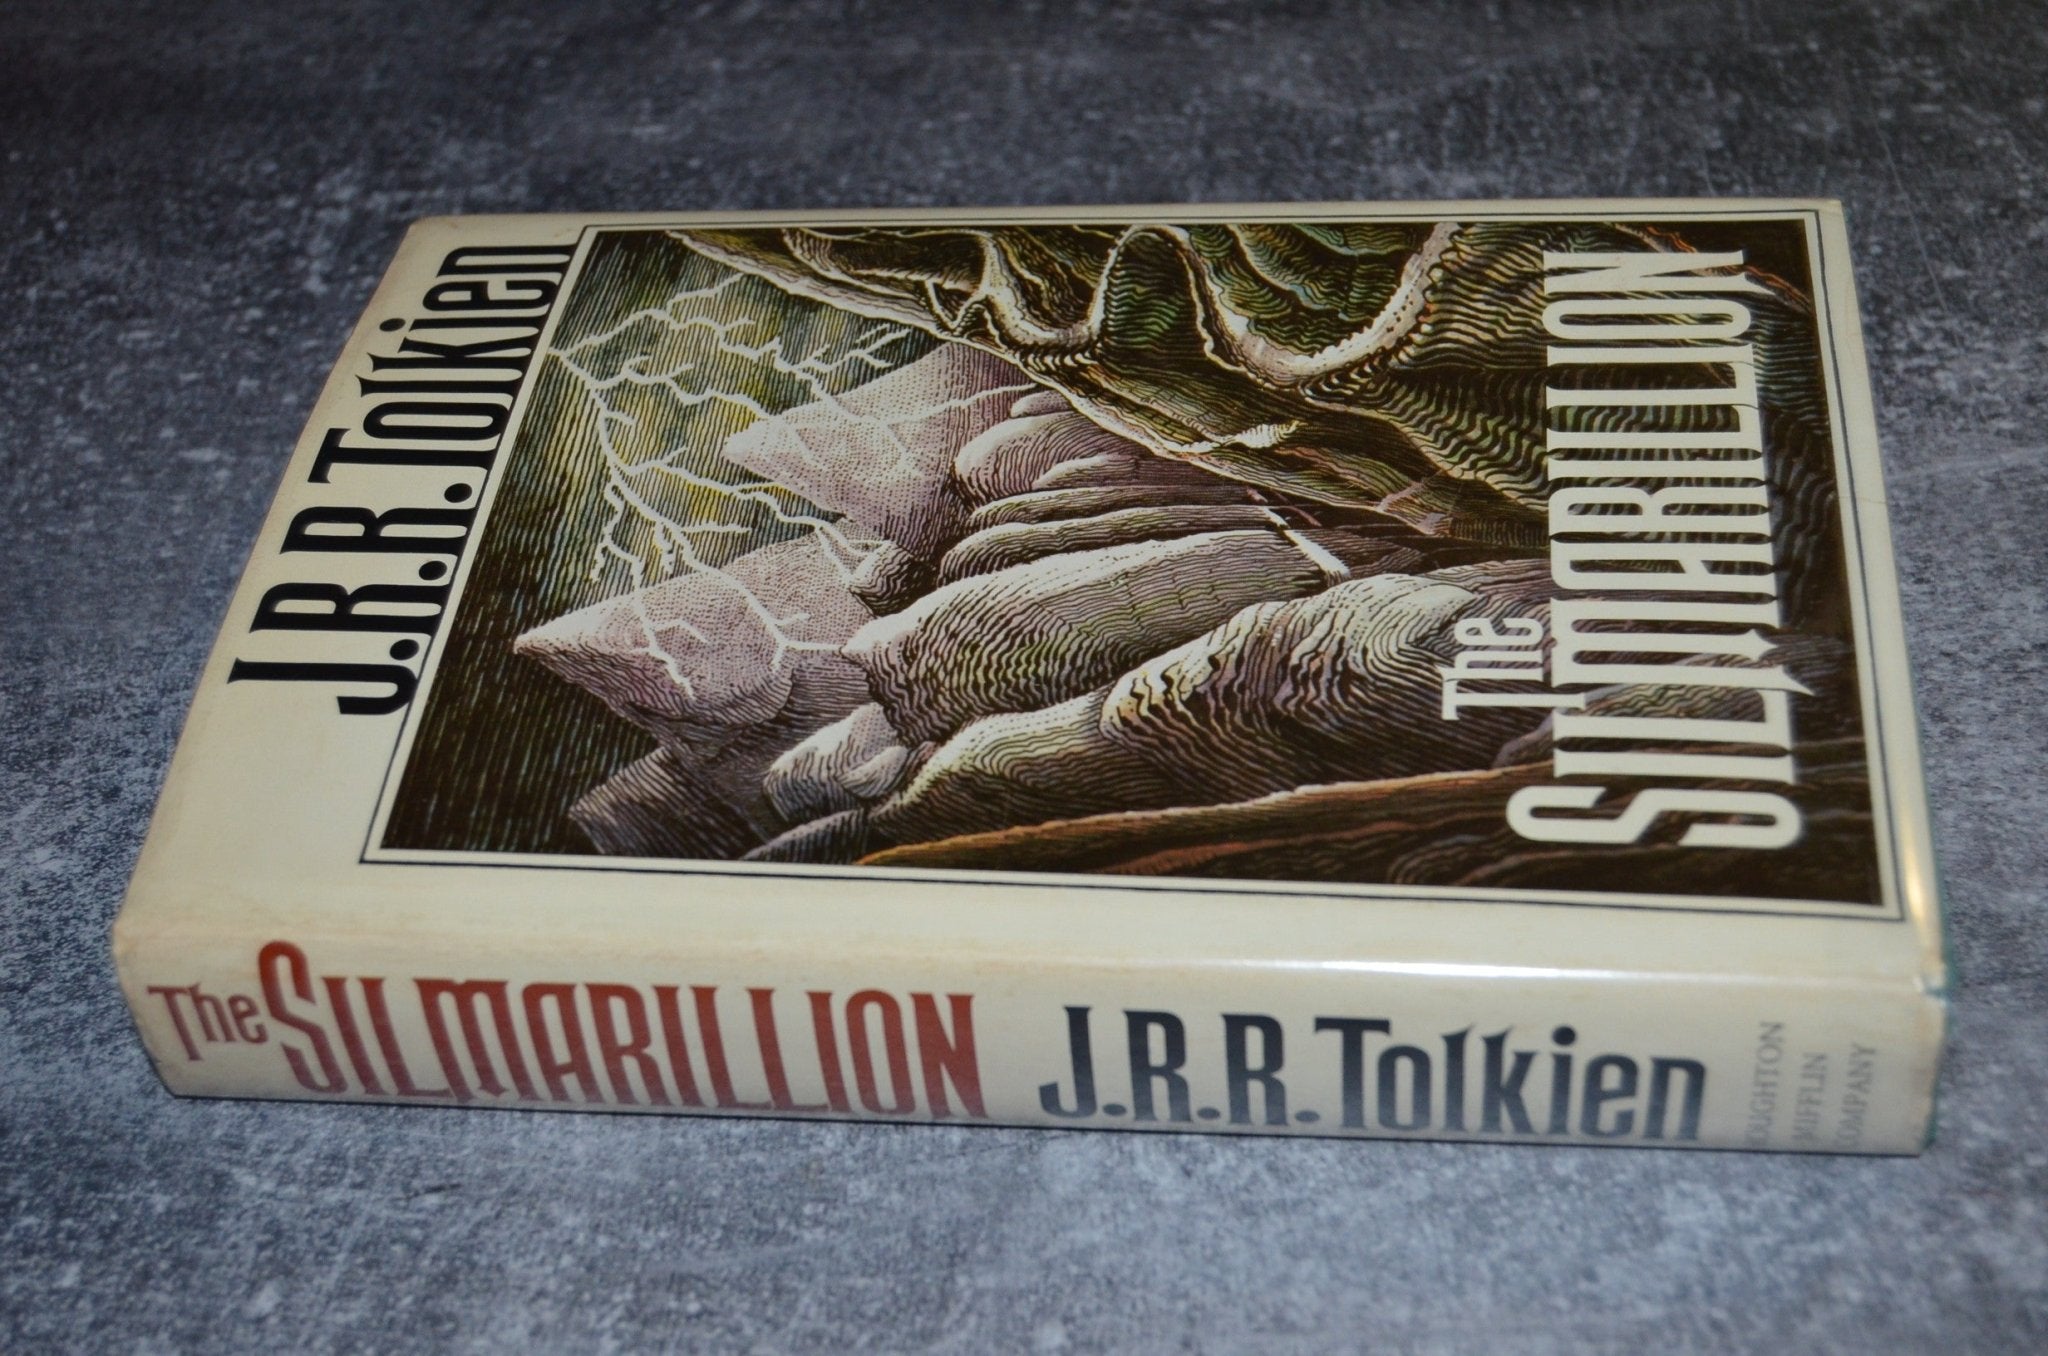 First Edition 9th Printing The Silmarillion by J. R. R. Tolkien 1977 - Brookfield Books